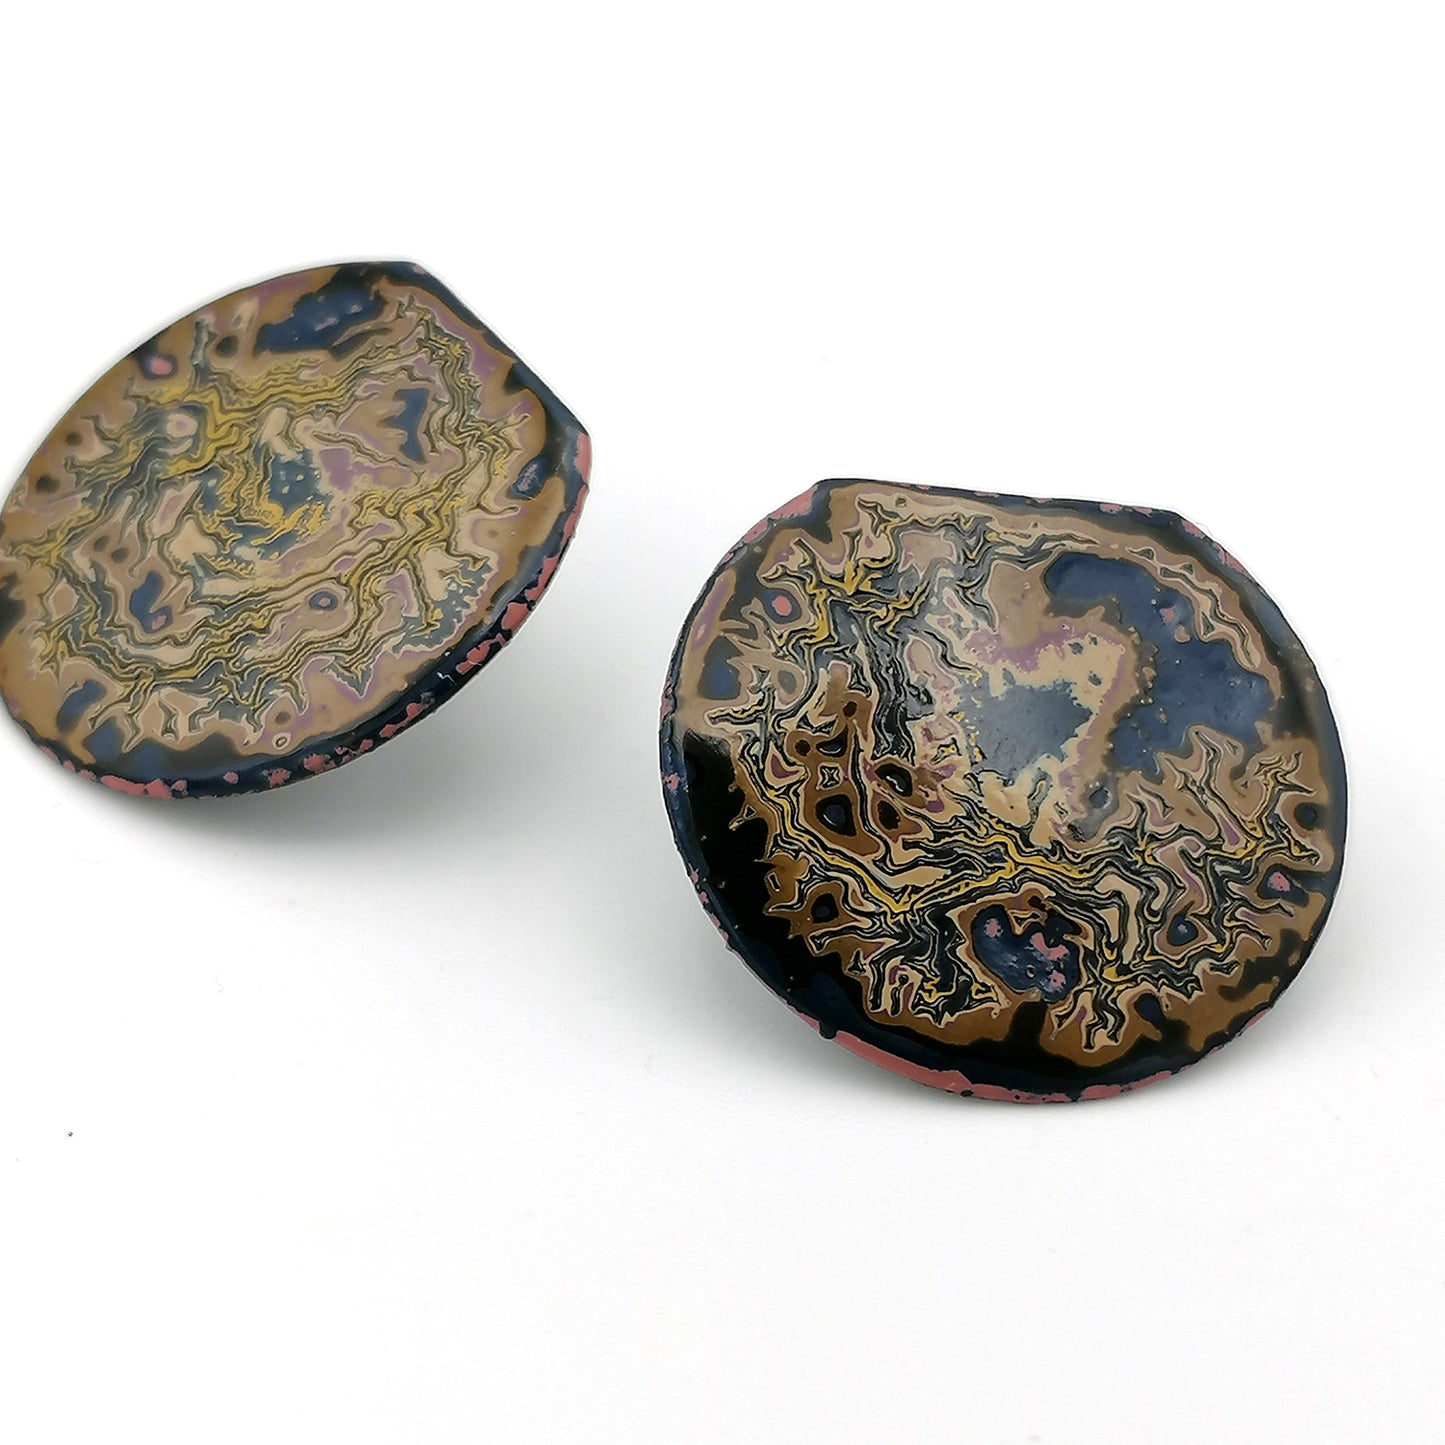 Image shows two round stud earrings with the top portion cut off. Earring shows a wrinkled pattern with yellow deep blue and beige.